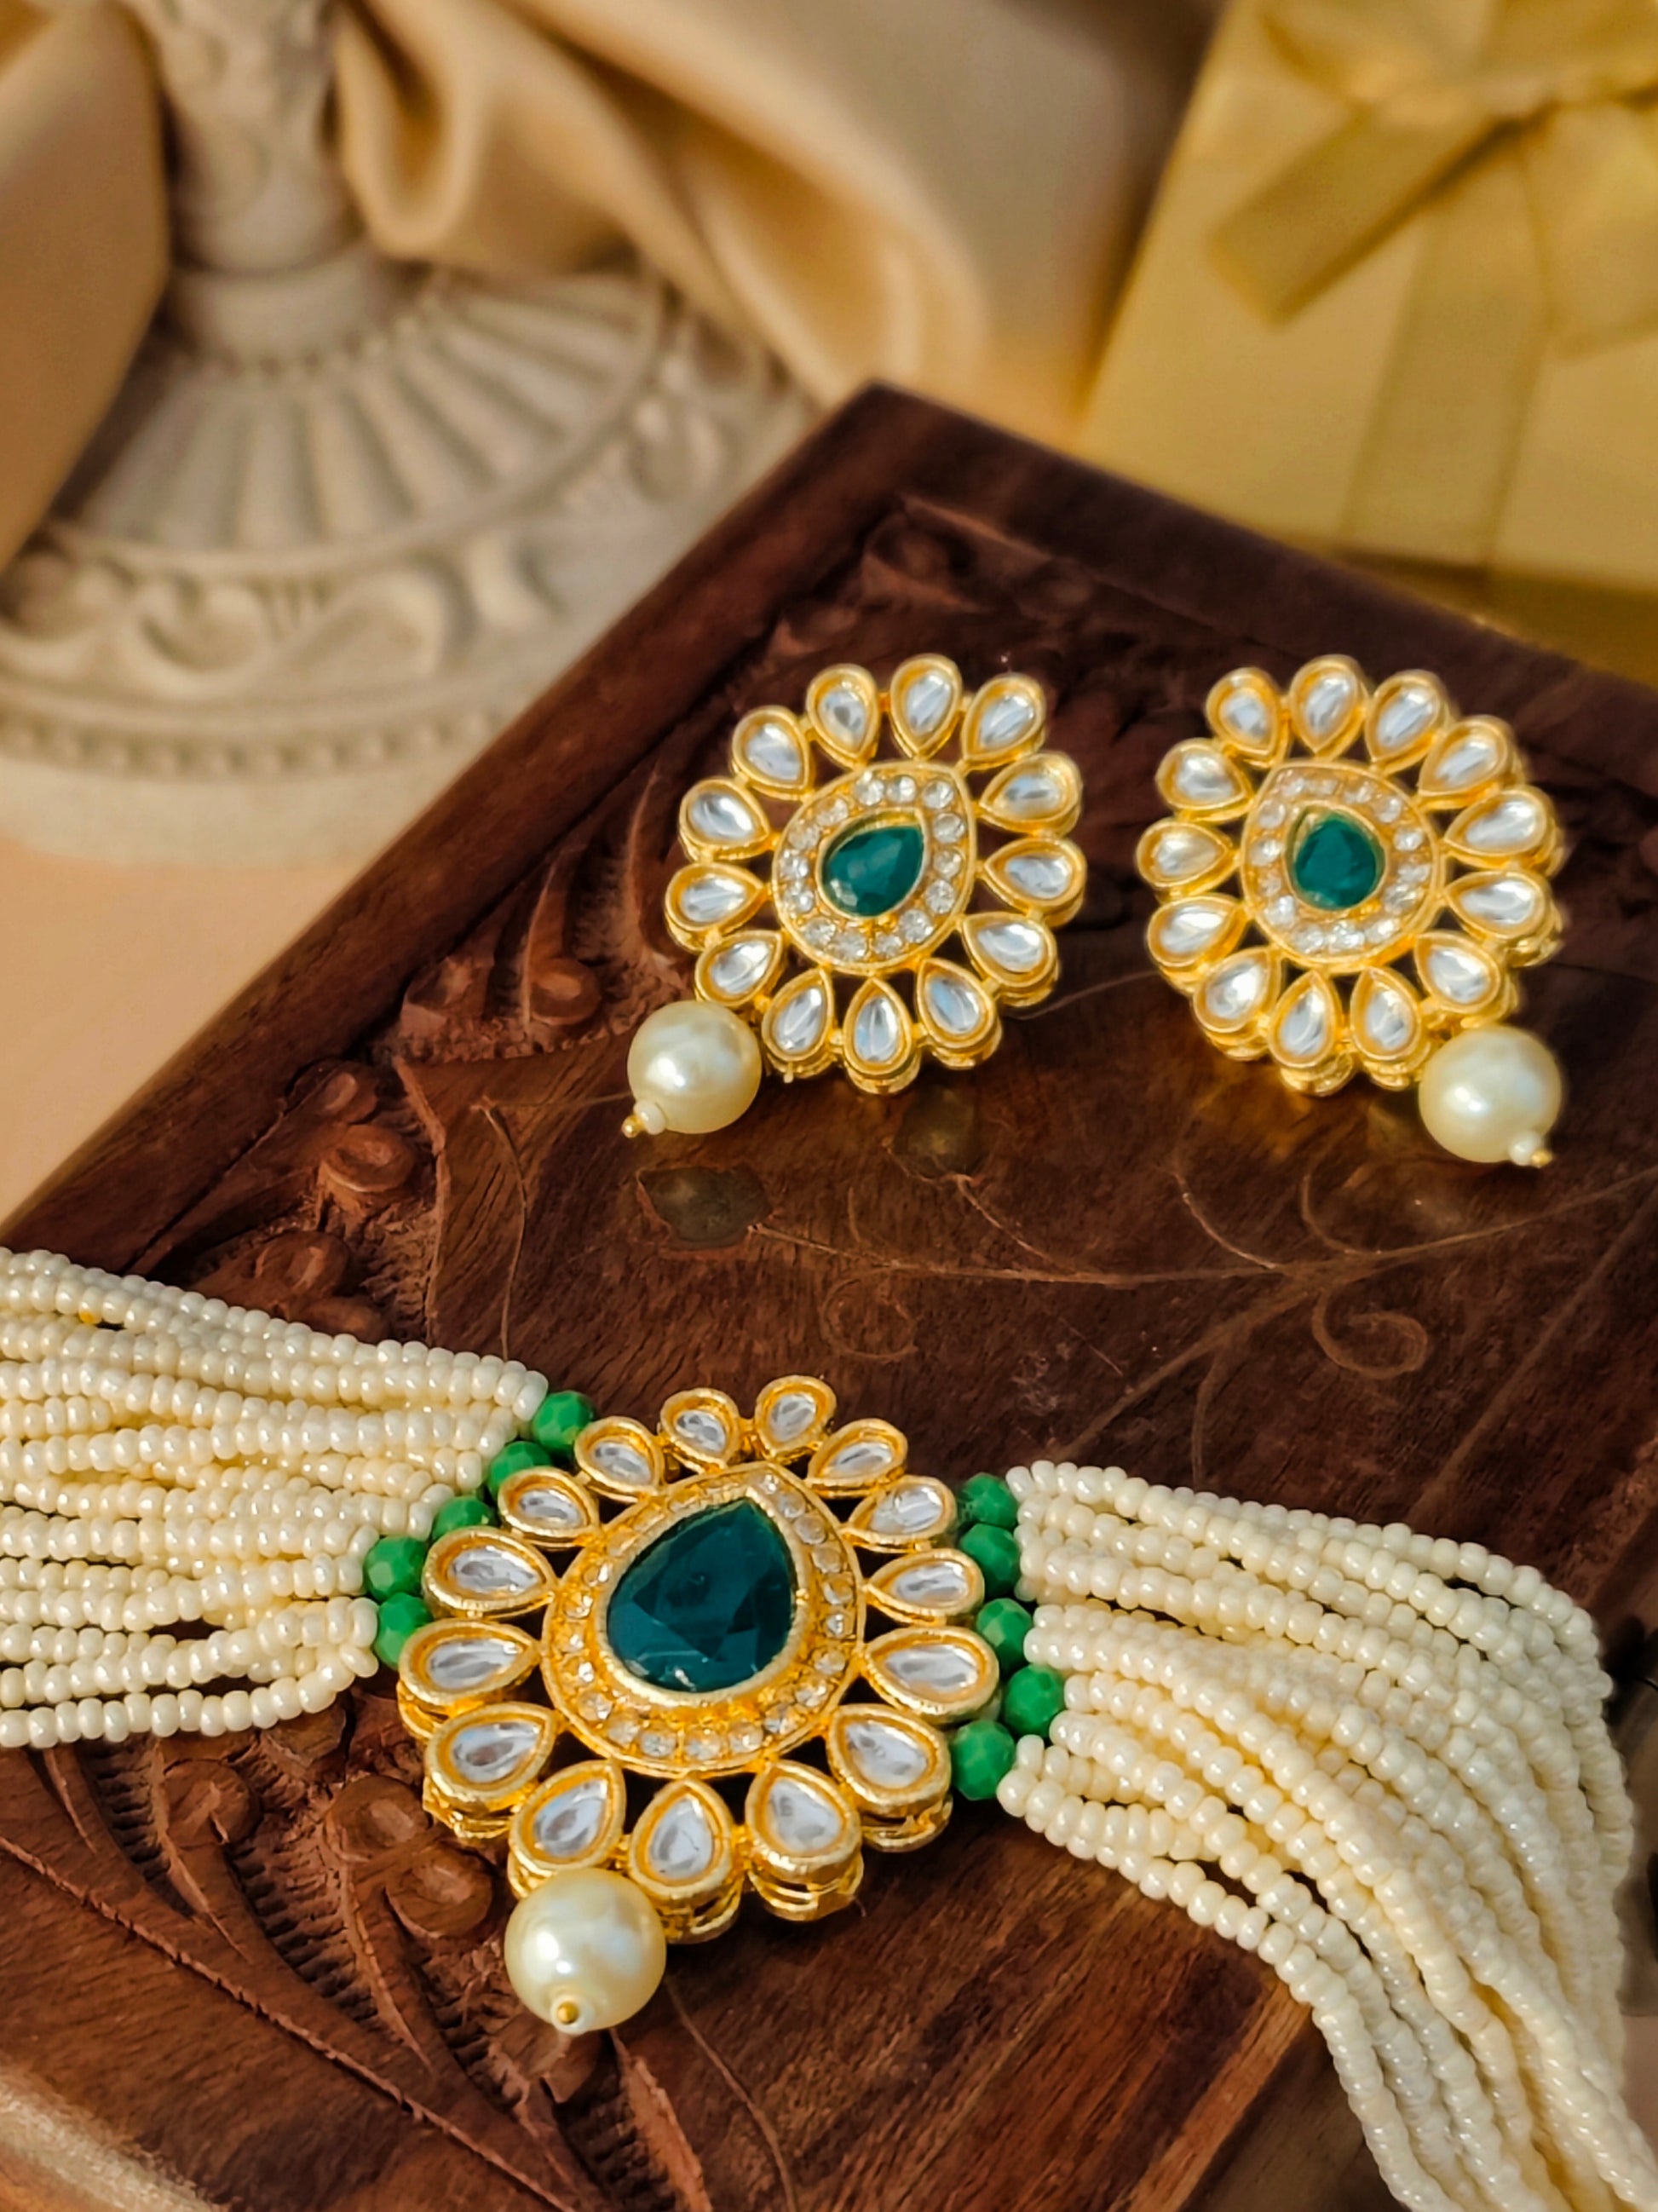 Moti Haari Chokar Necklace Set from house of Mrigaya by Nandini for Traditional and Festive Indian Look | for Gifting - Clear & Green - Mrigaya India